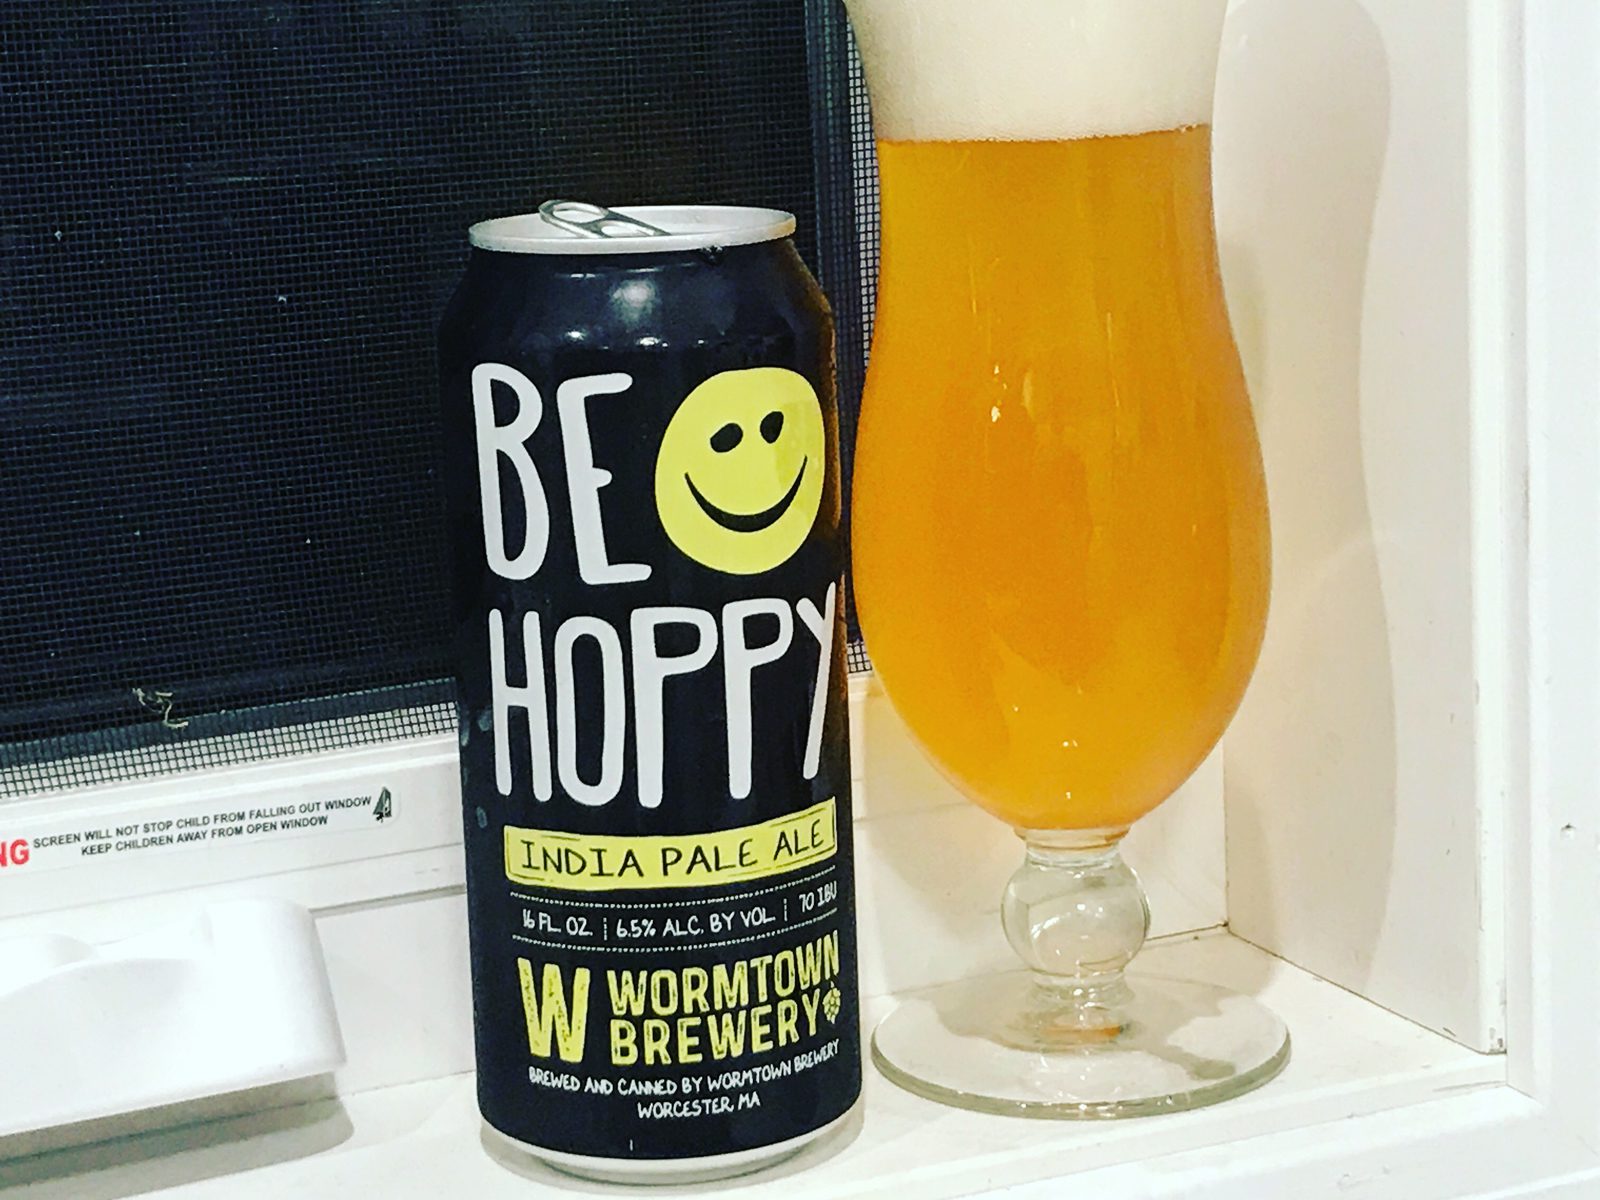 Wormtown Brewery: Be Hoppy